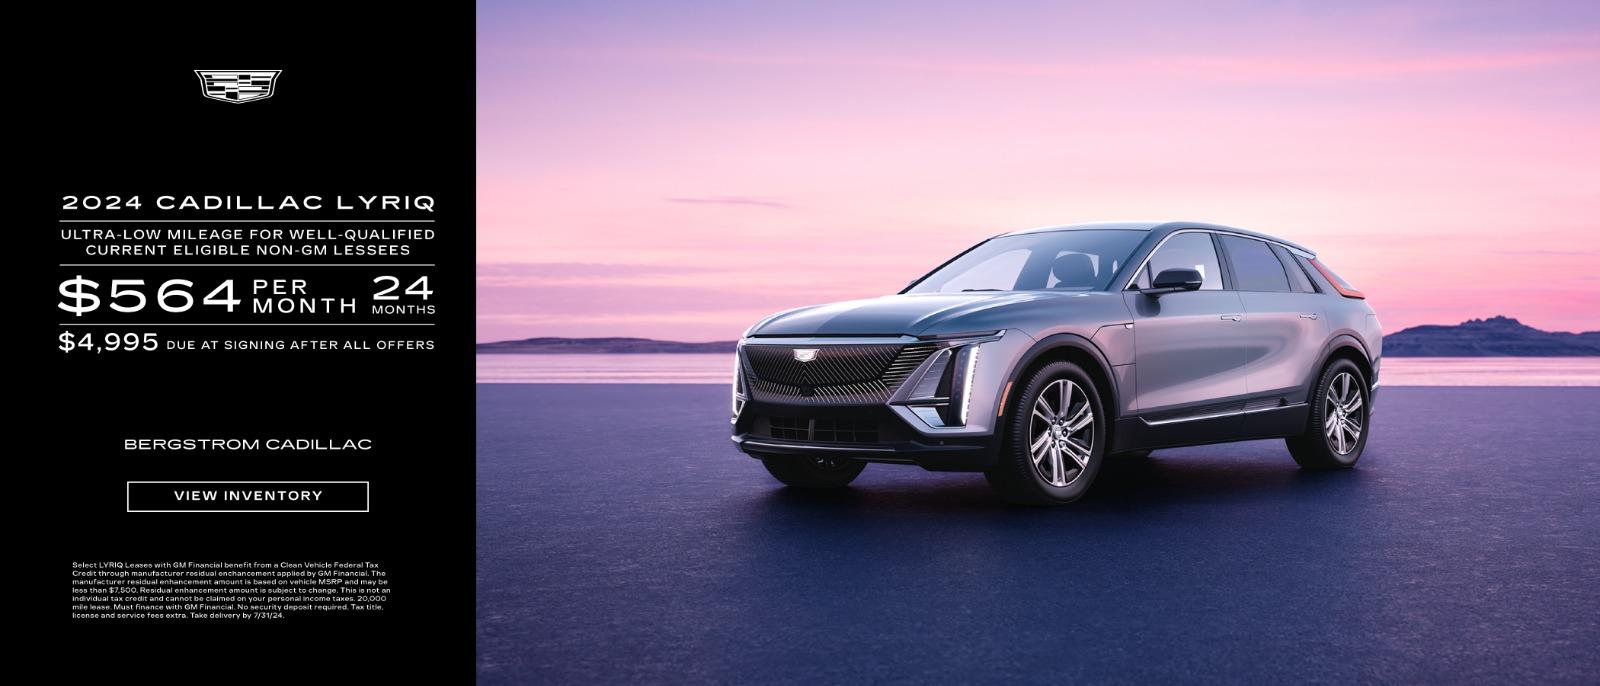 2024 Cadillac Lyriq AWD lease for $564 for 24 months